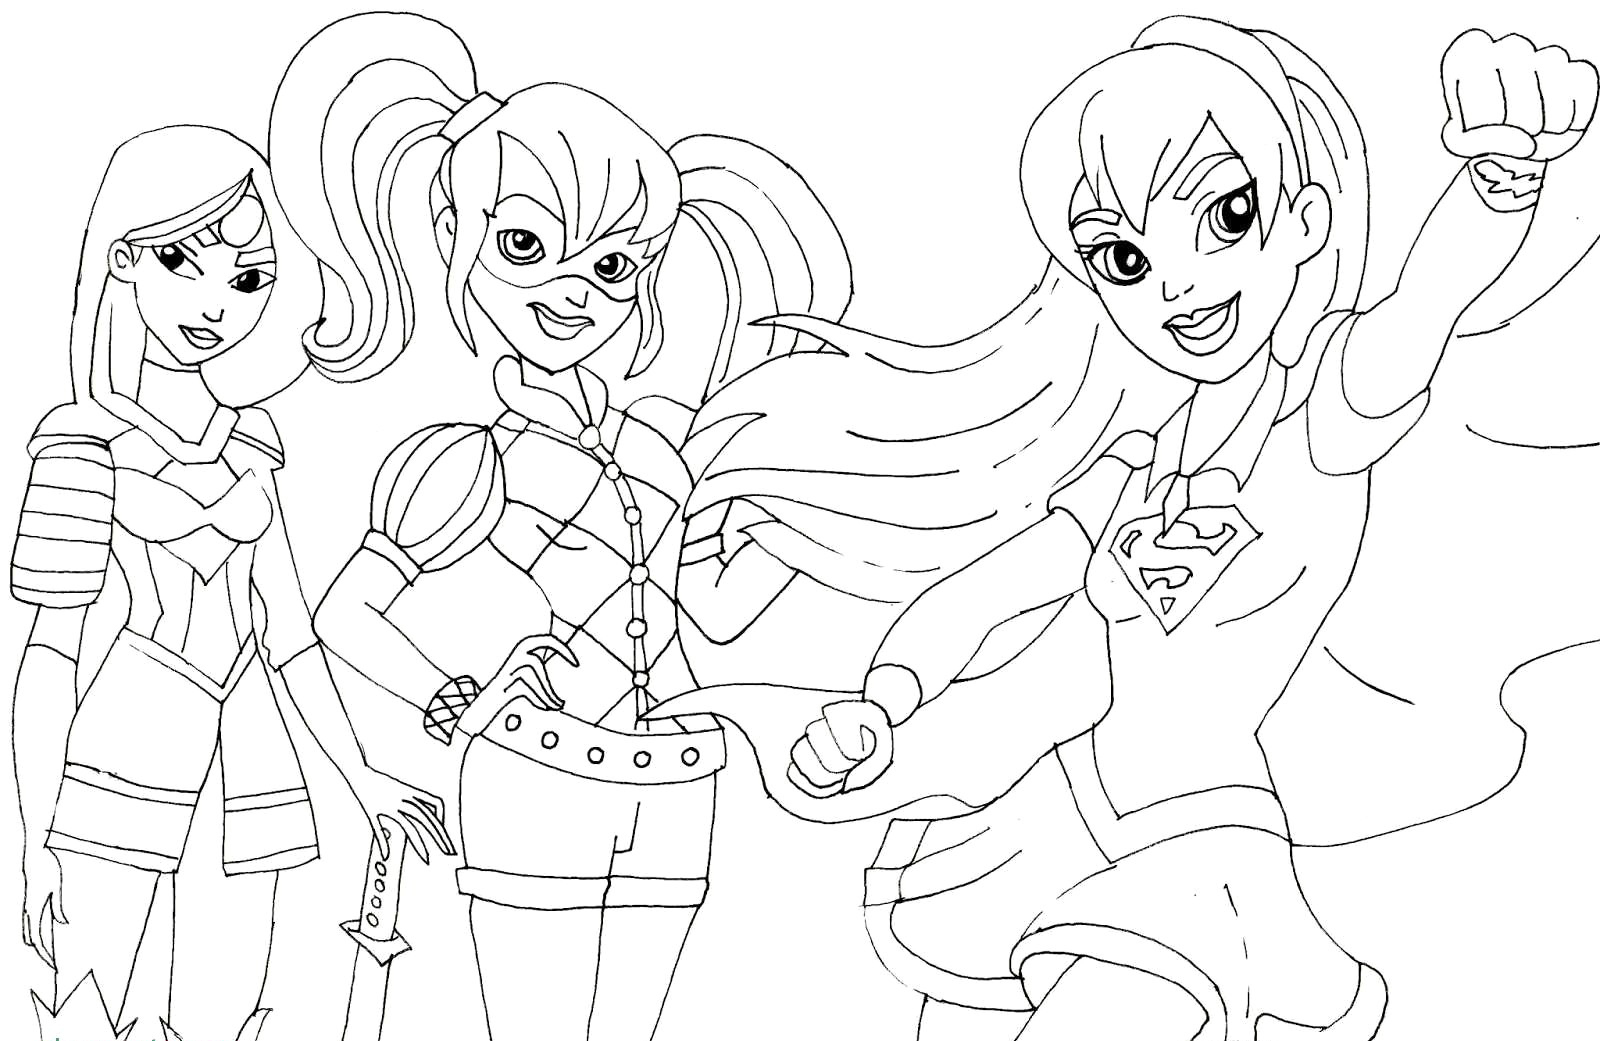 Dc Superhero Girls Coloring Pages Best Coloring Pages For Kids